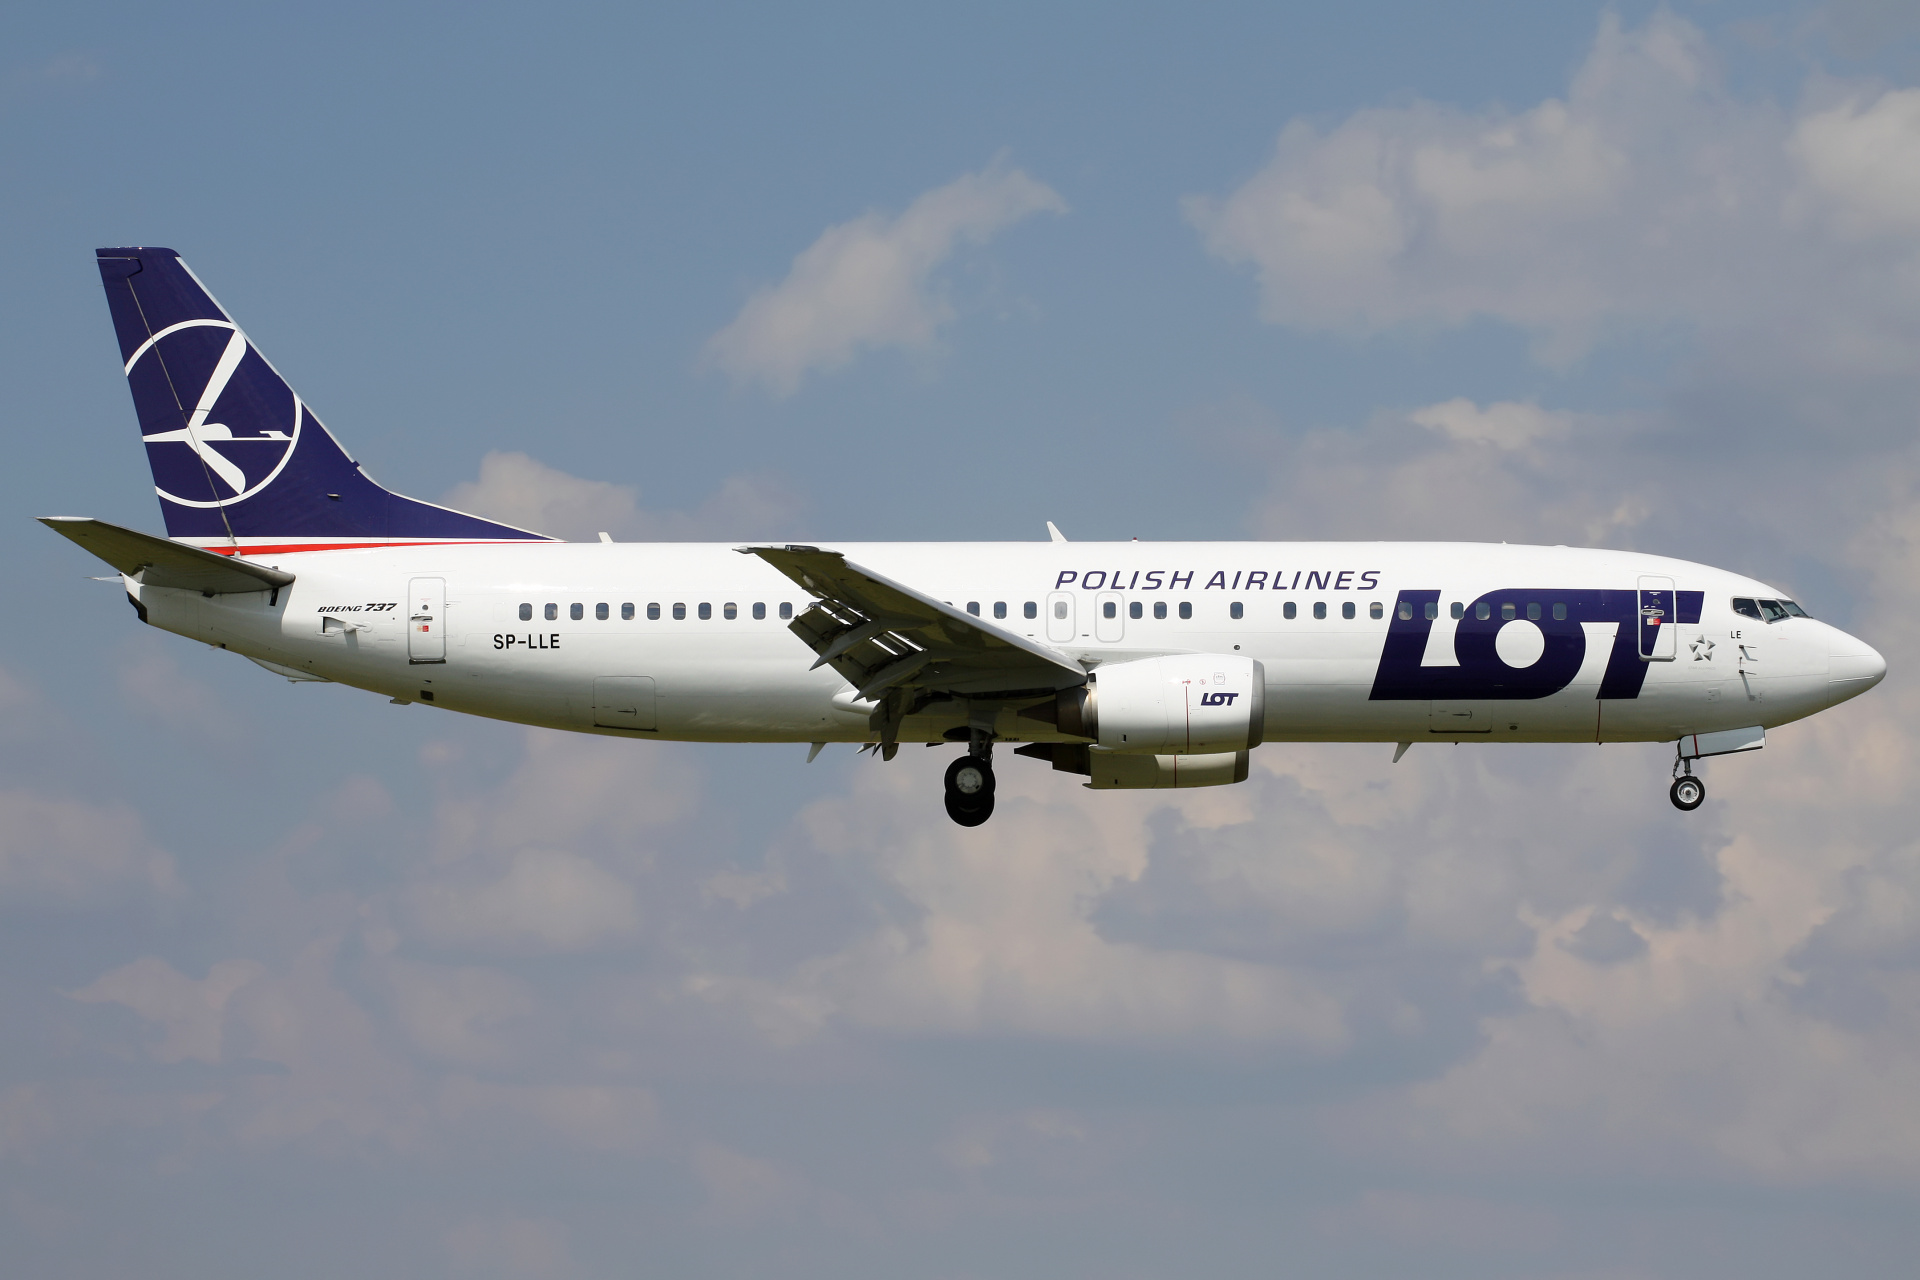 SP-LLE (Aircraft » EPWA Spotting » Boeing 737-400 » LOT Polish Airlines)